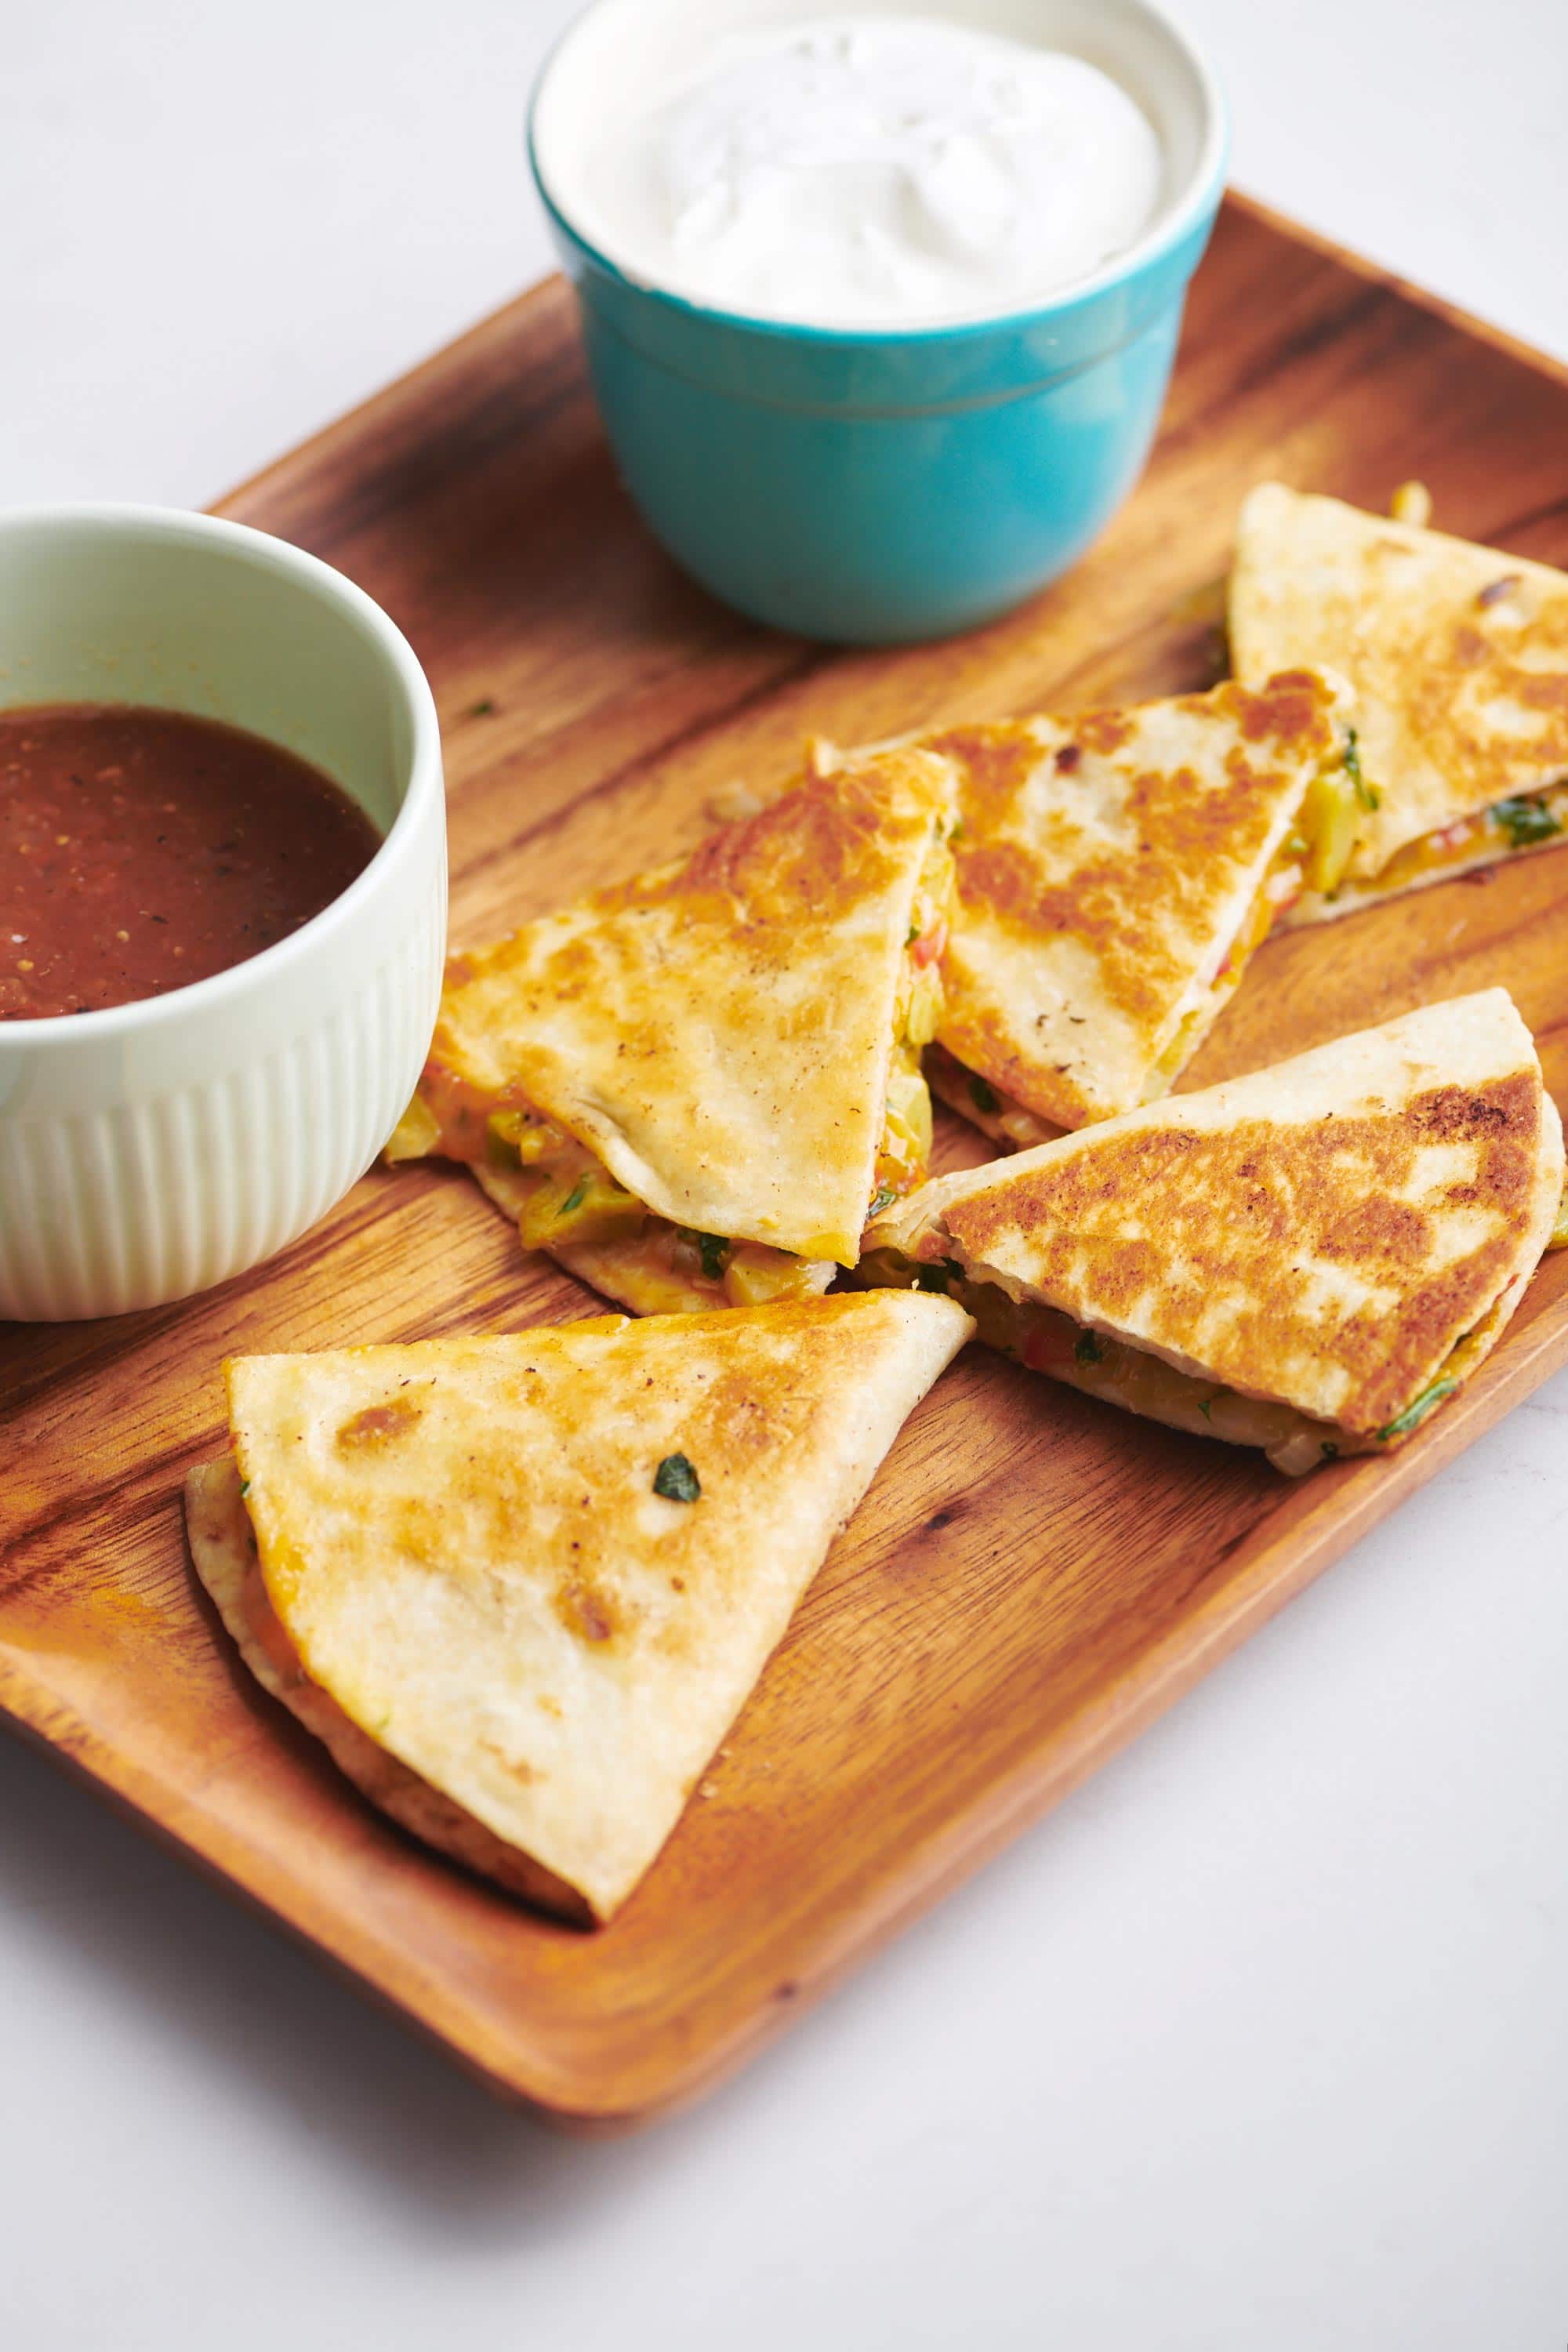 Wooden tray of Vegetable Quesadillas and dips.